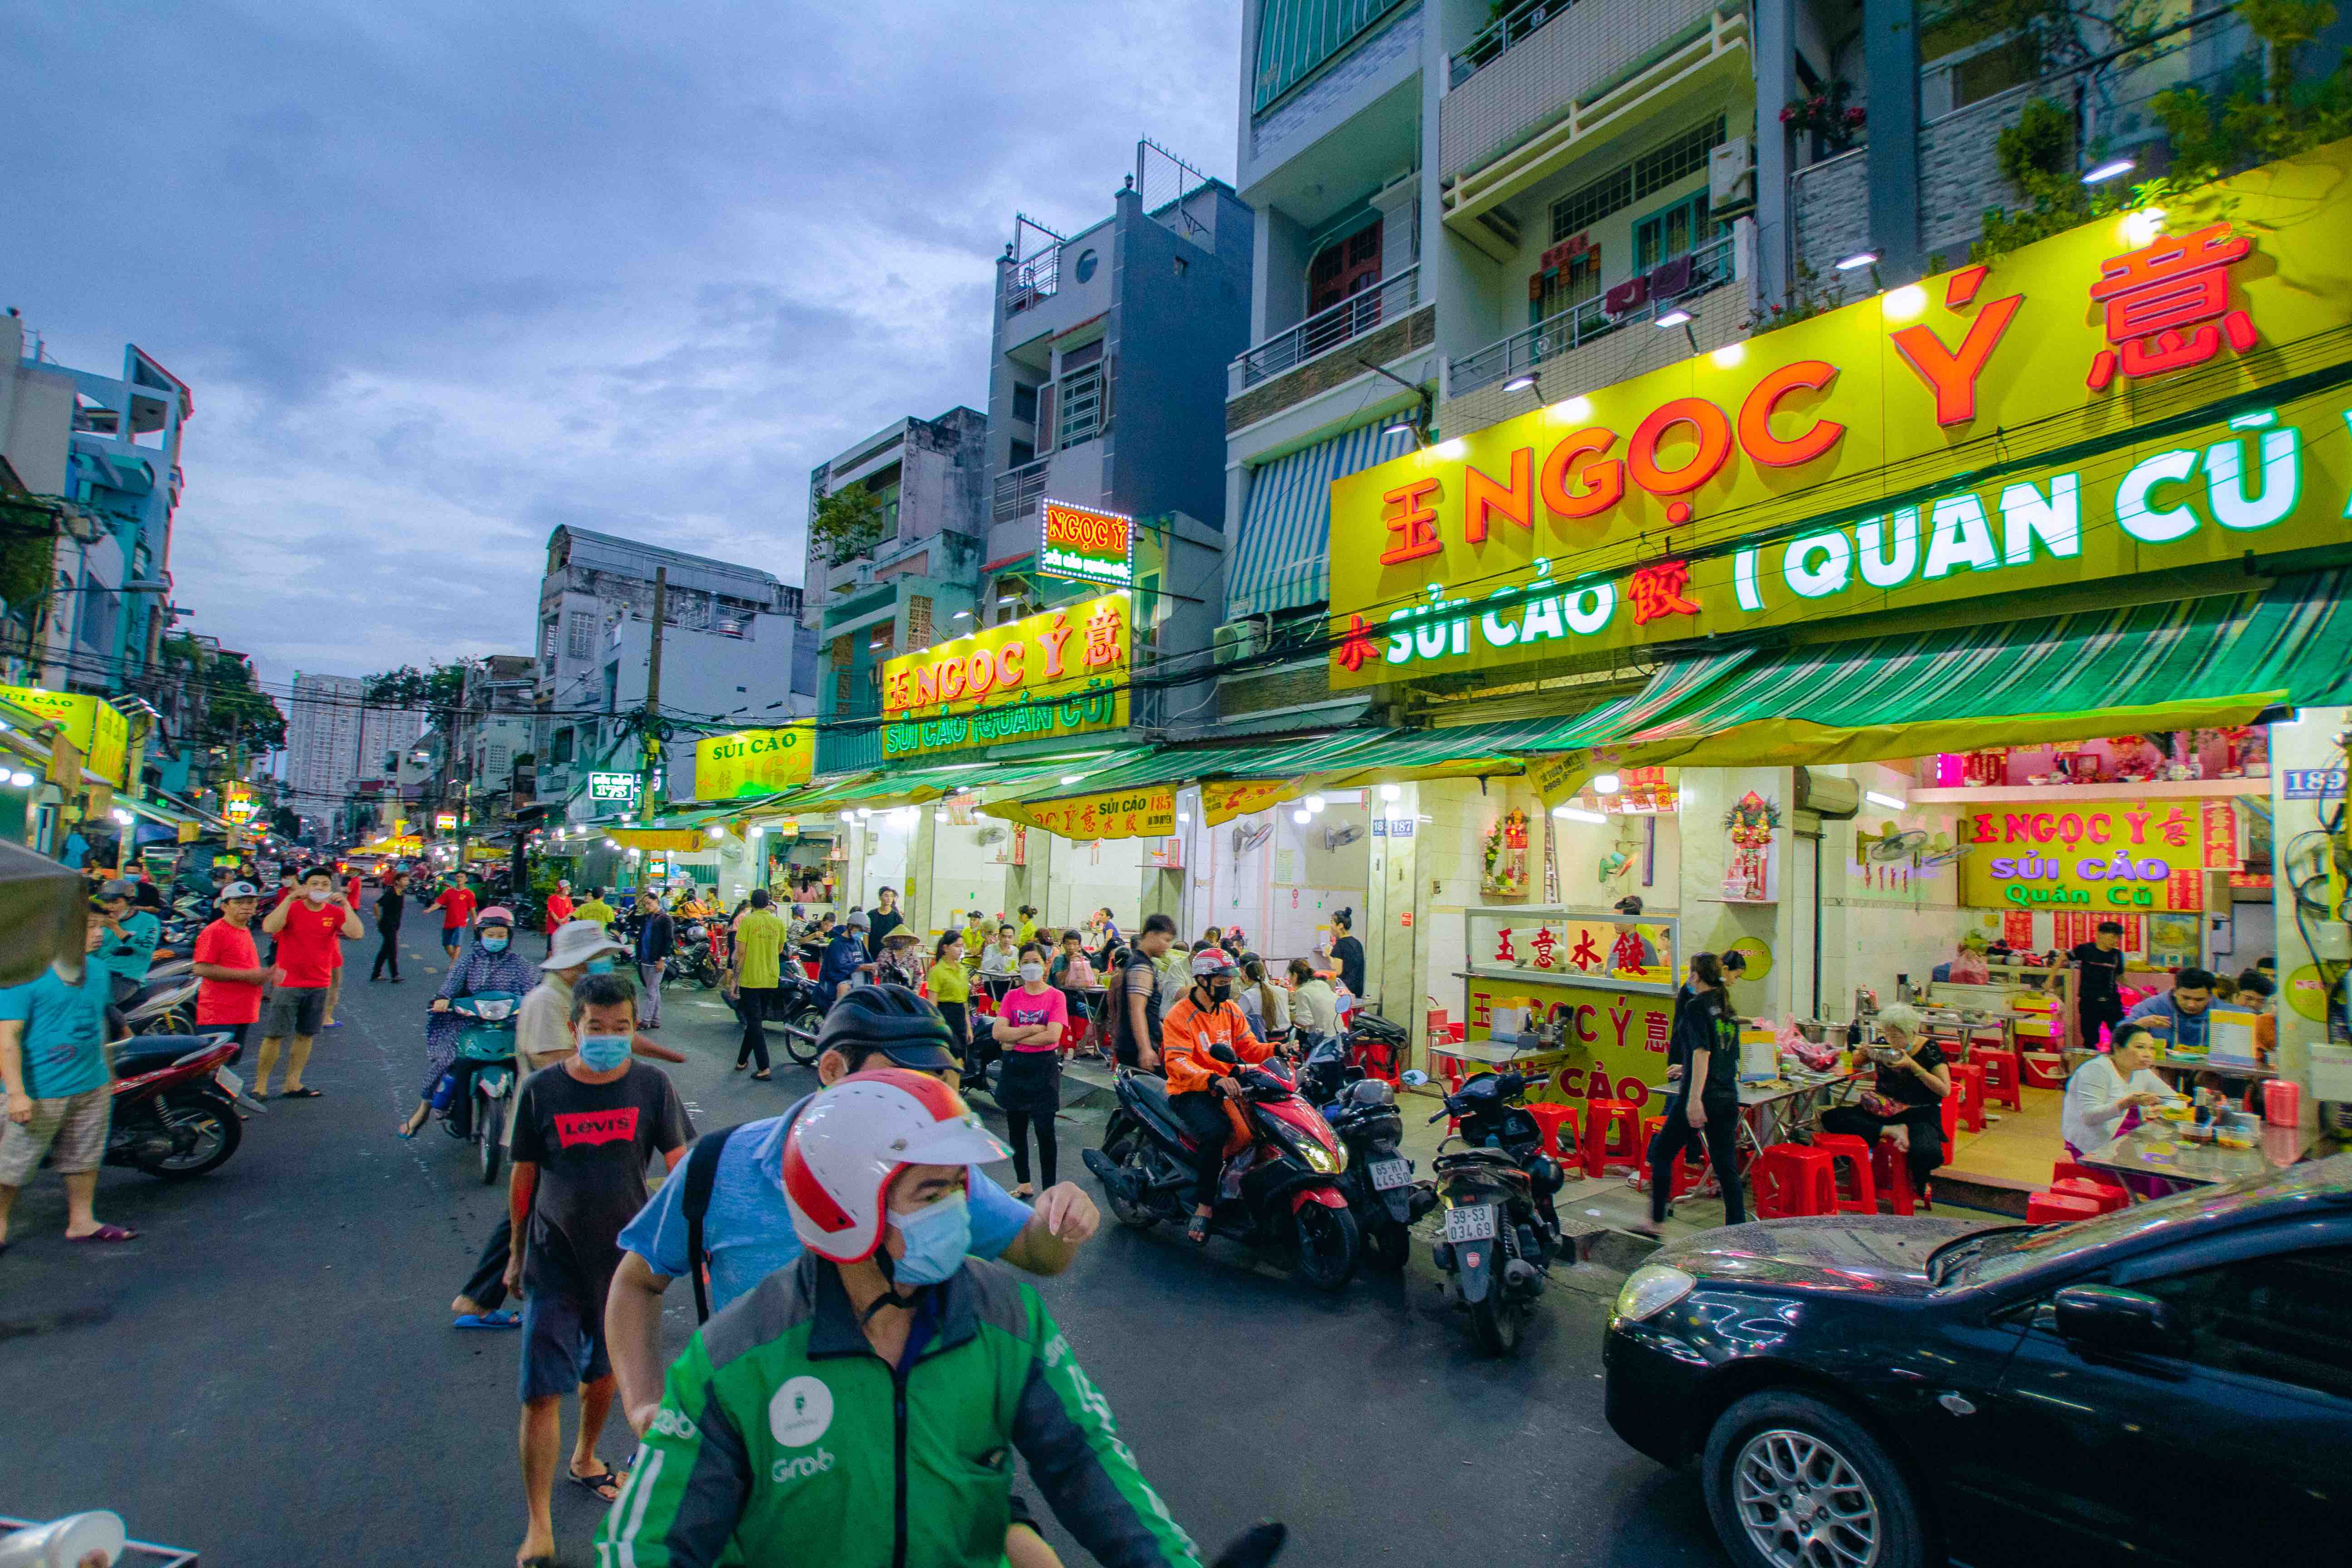 Diners would never regret visiting this 'shuijiao dumpling' street in Ho Chi Minh City